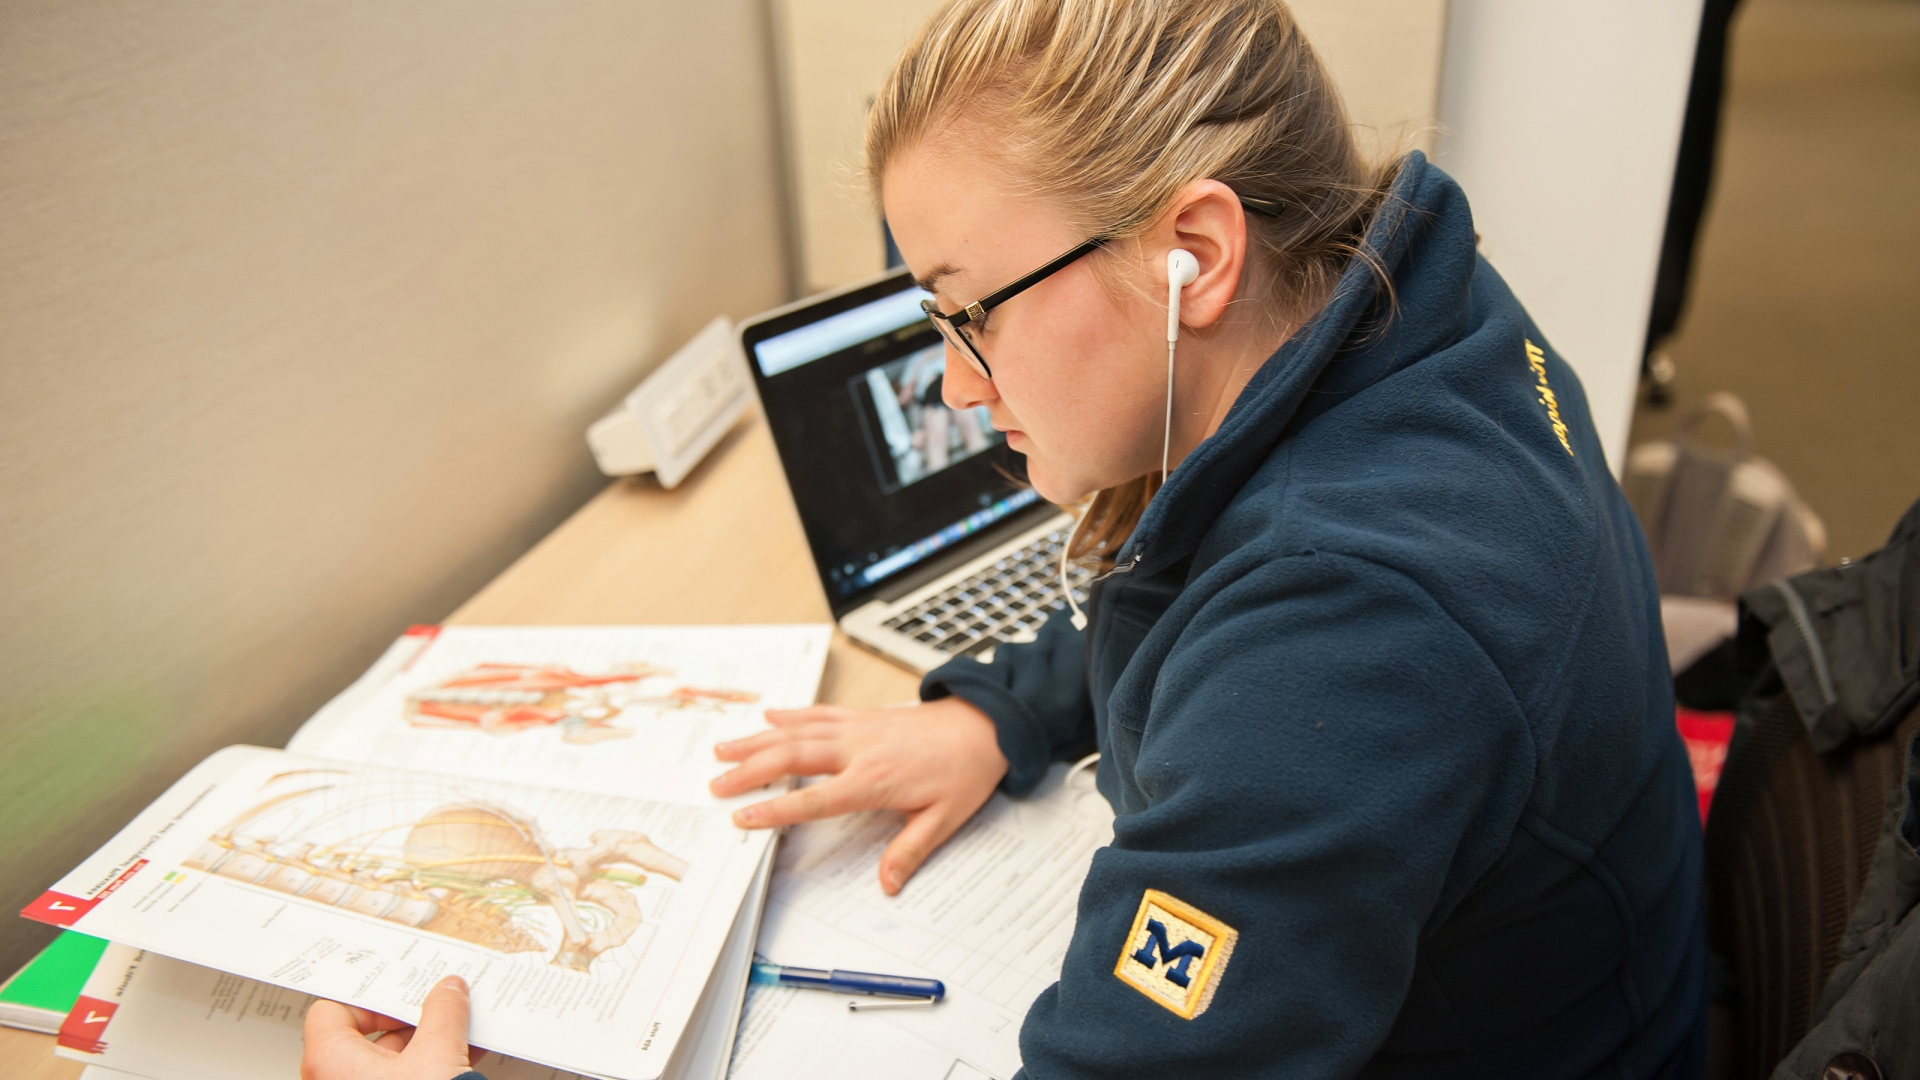 Female student wearing earbuds and Michigan hoodie looking at anatomy textbook with laptop in background